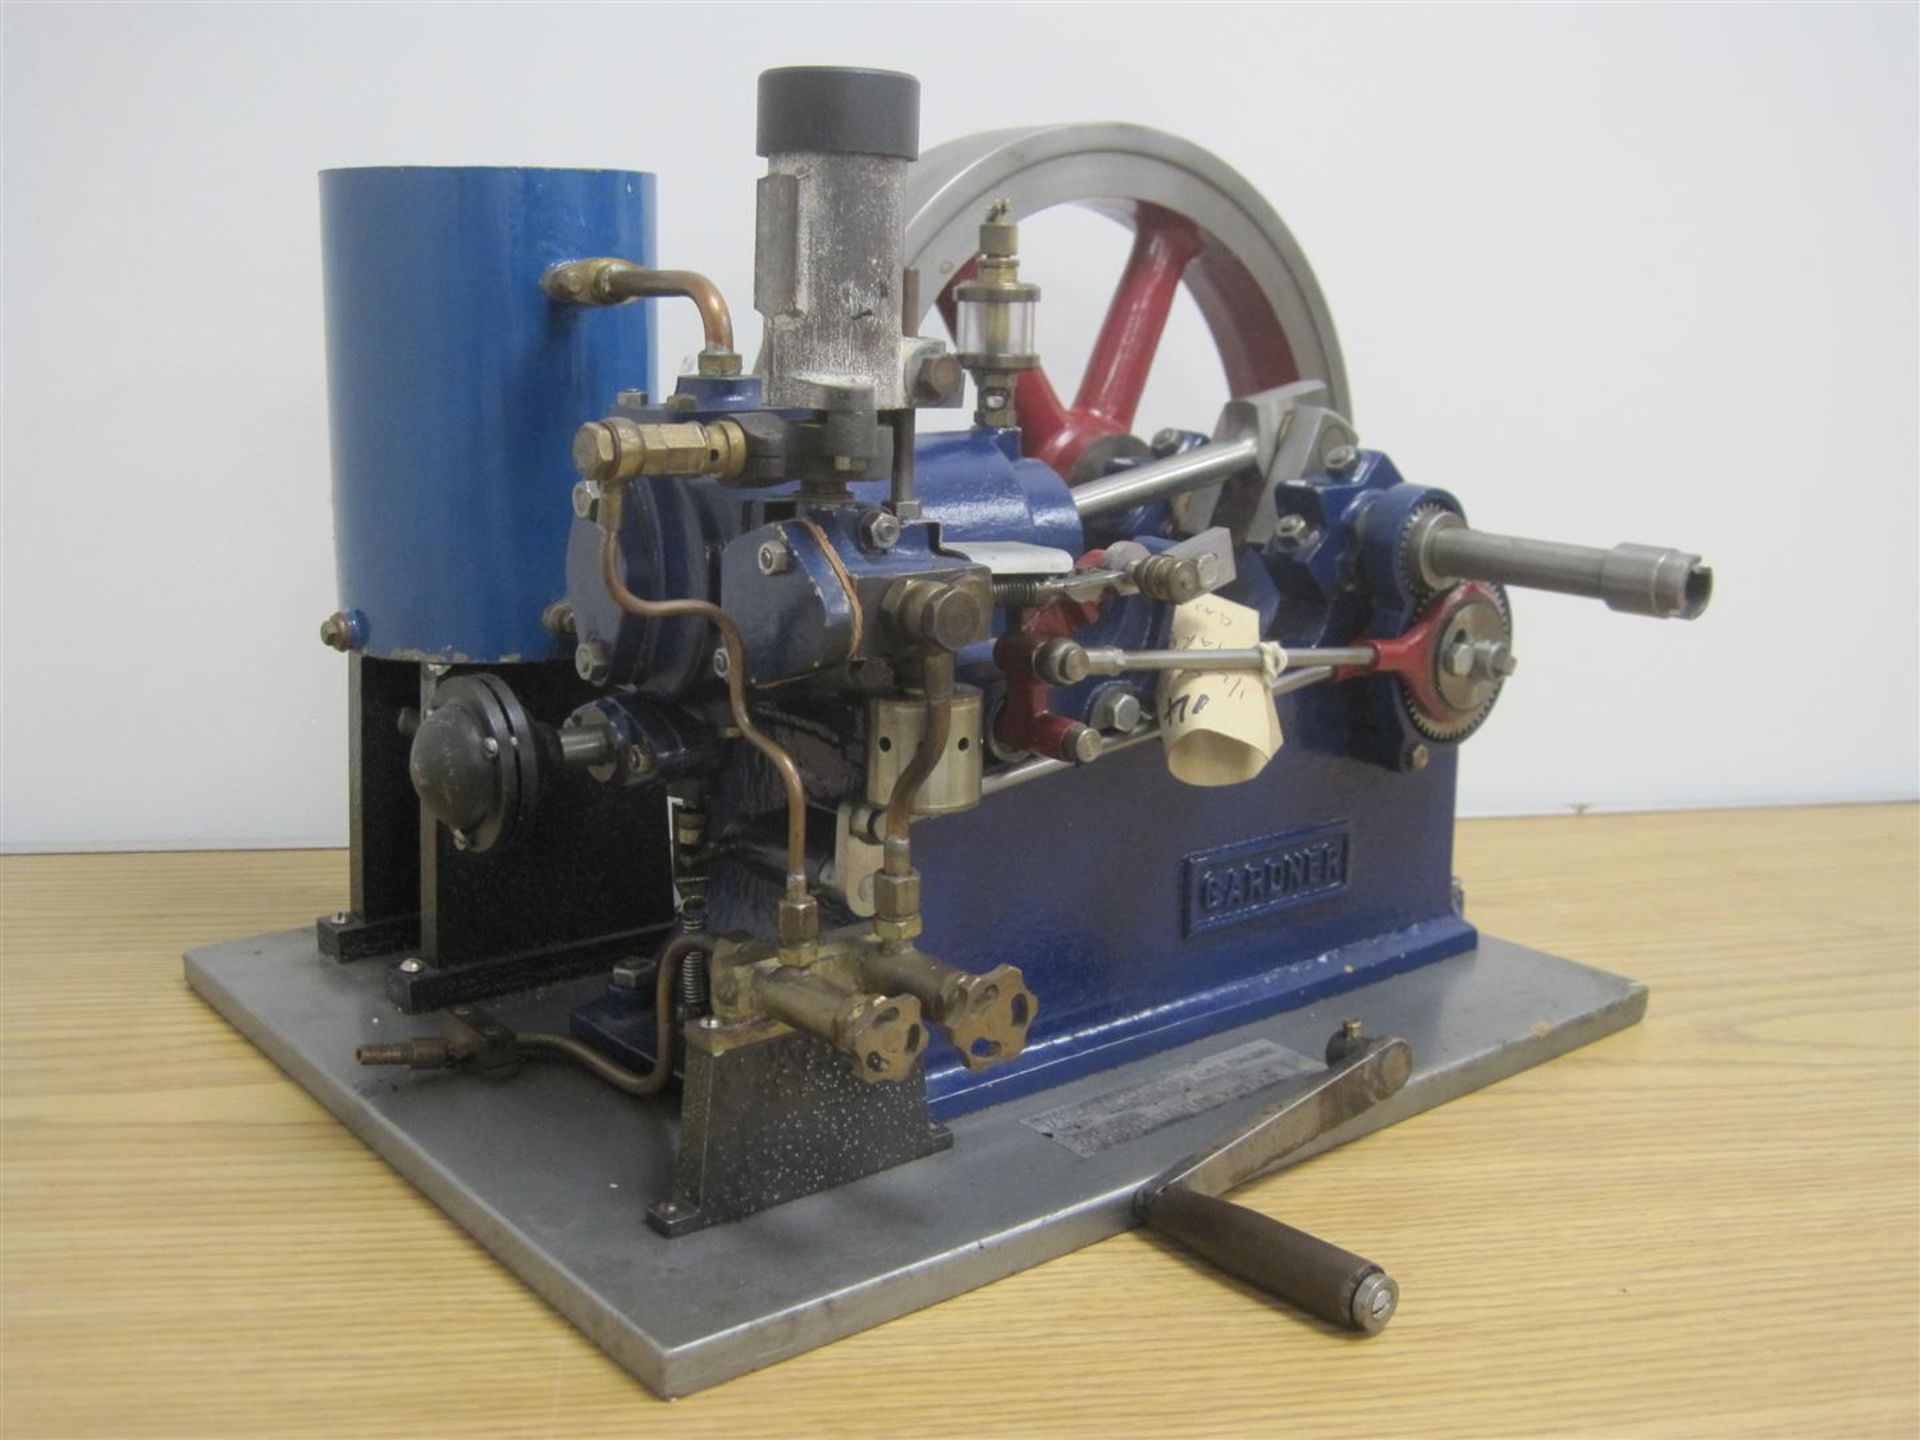 Alyn Foundry 1/2 scale Gardner Size 0 hot bulb gas engine complete with starting handle, water